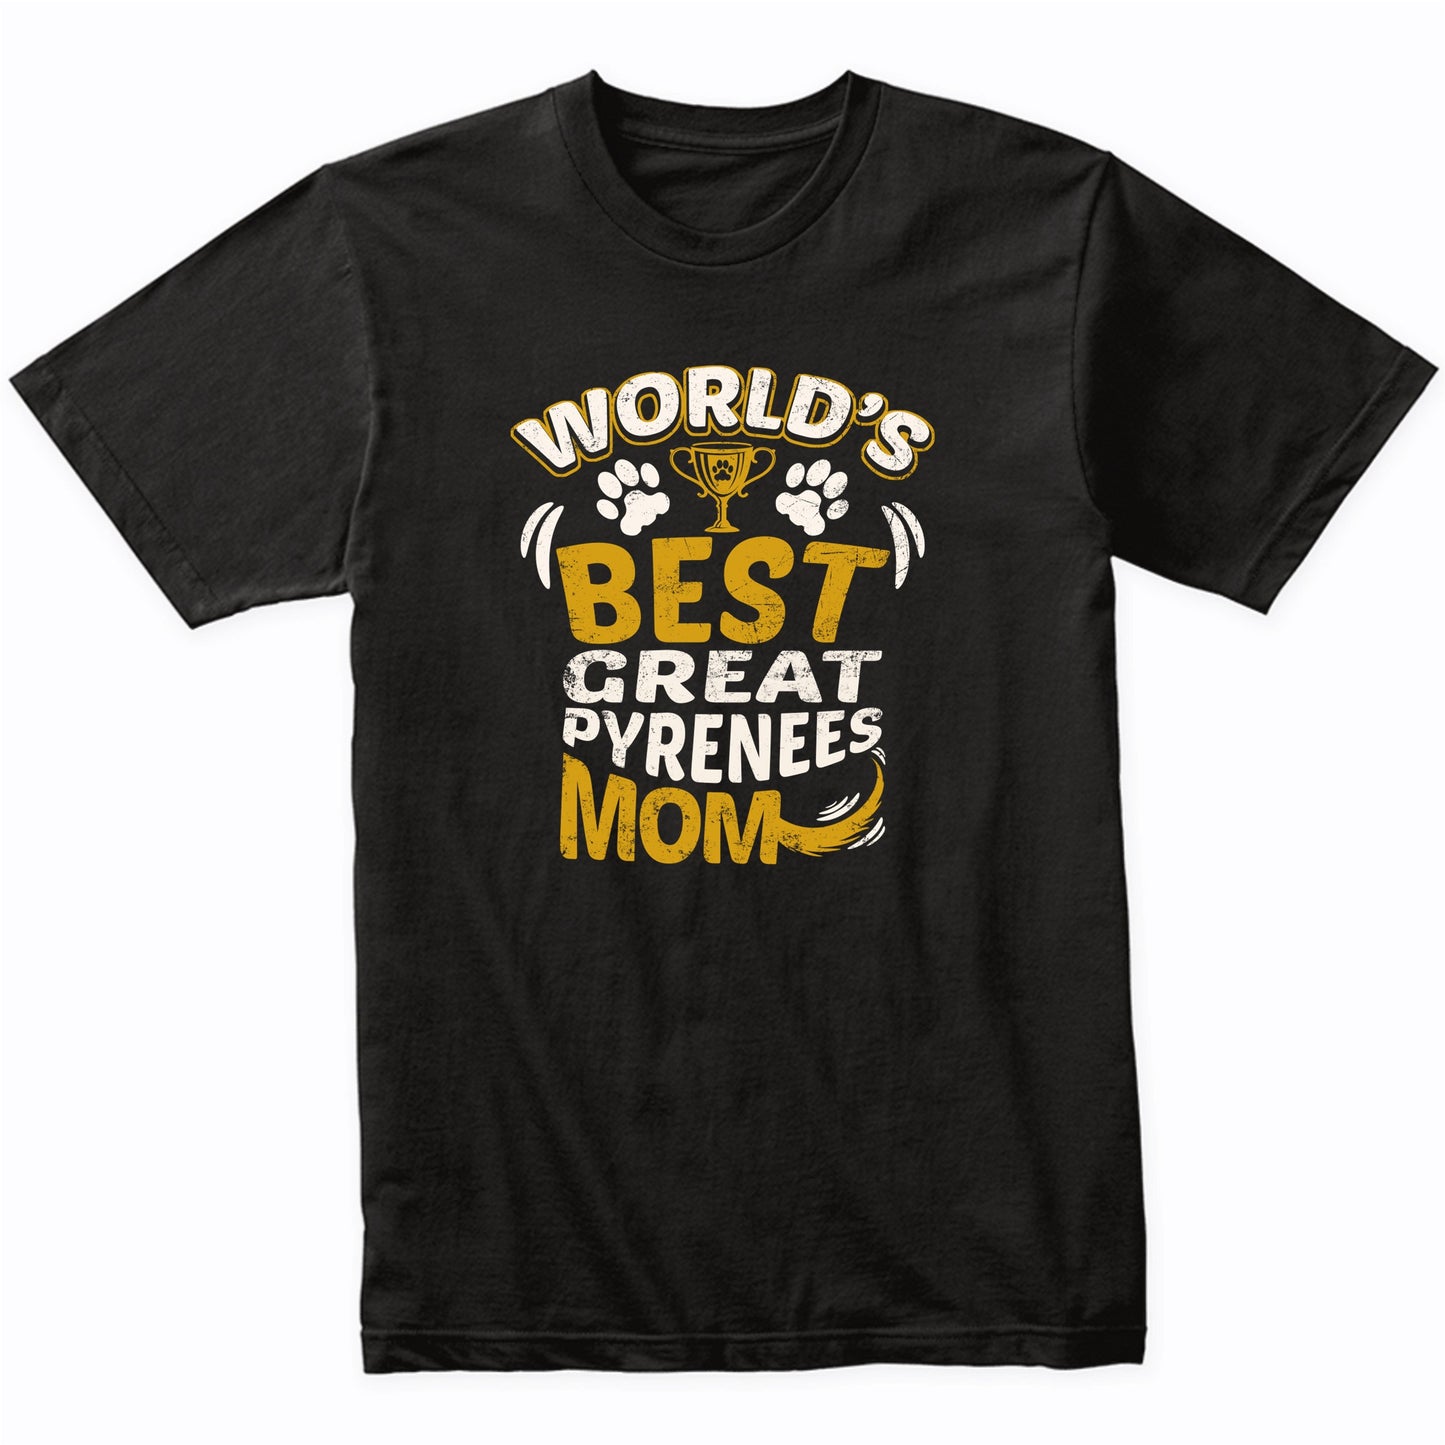 World's Best Great Pyrenees Mom Graphic T-Shirt